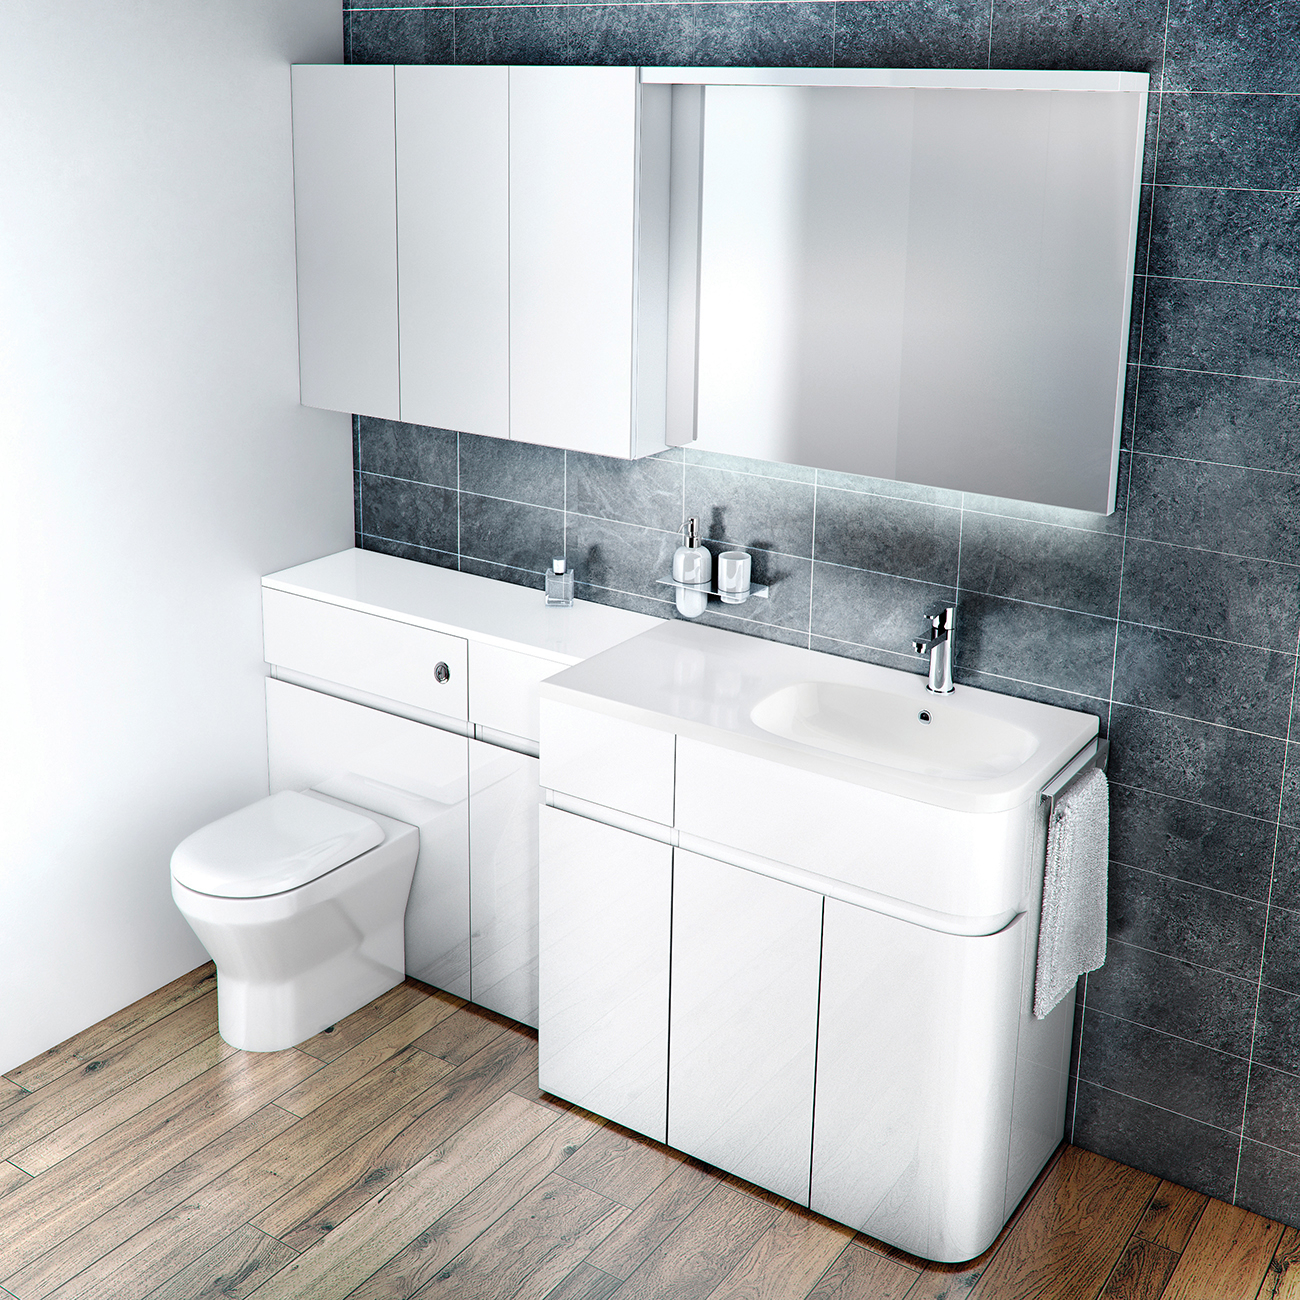 Aqua Cabinets D450 Fitted Bathroom Furniture Uk Bathroom throughout dimensions 1300 X 1300